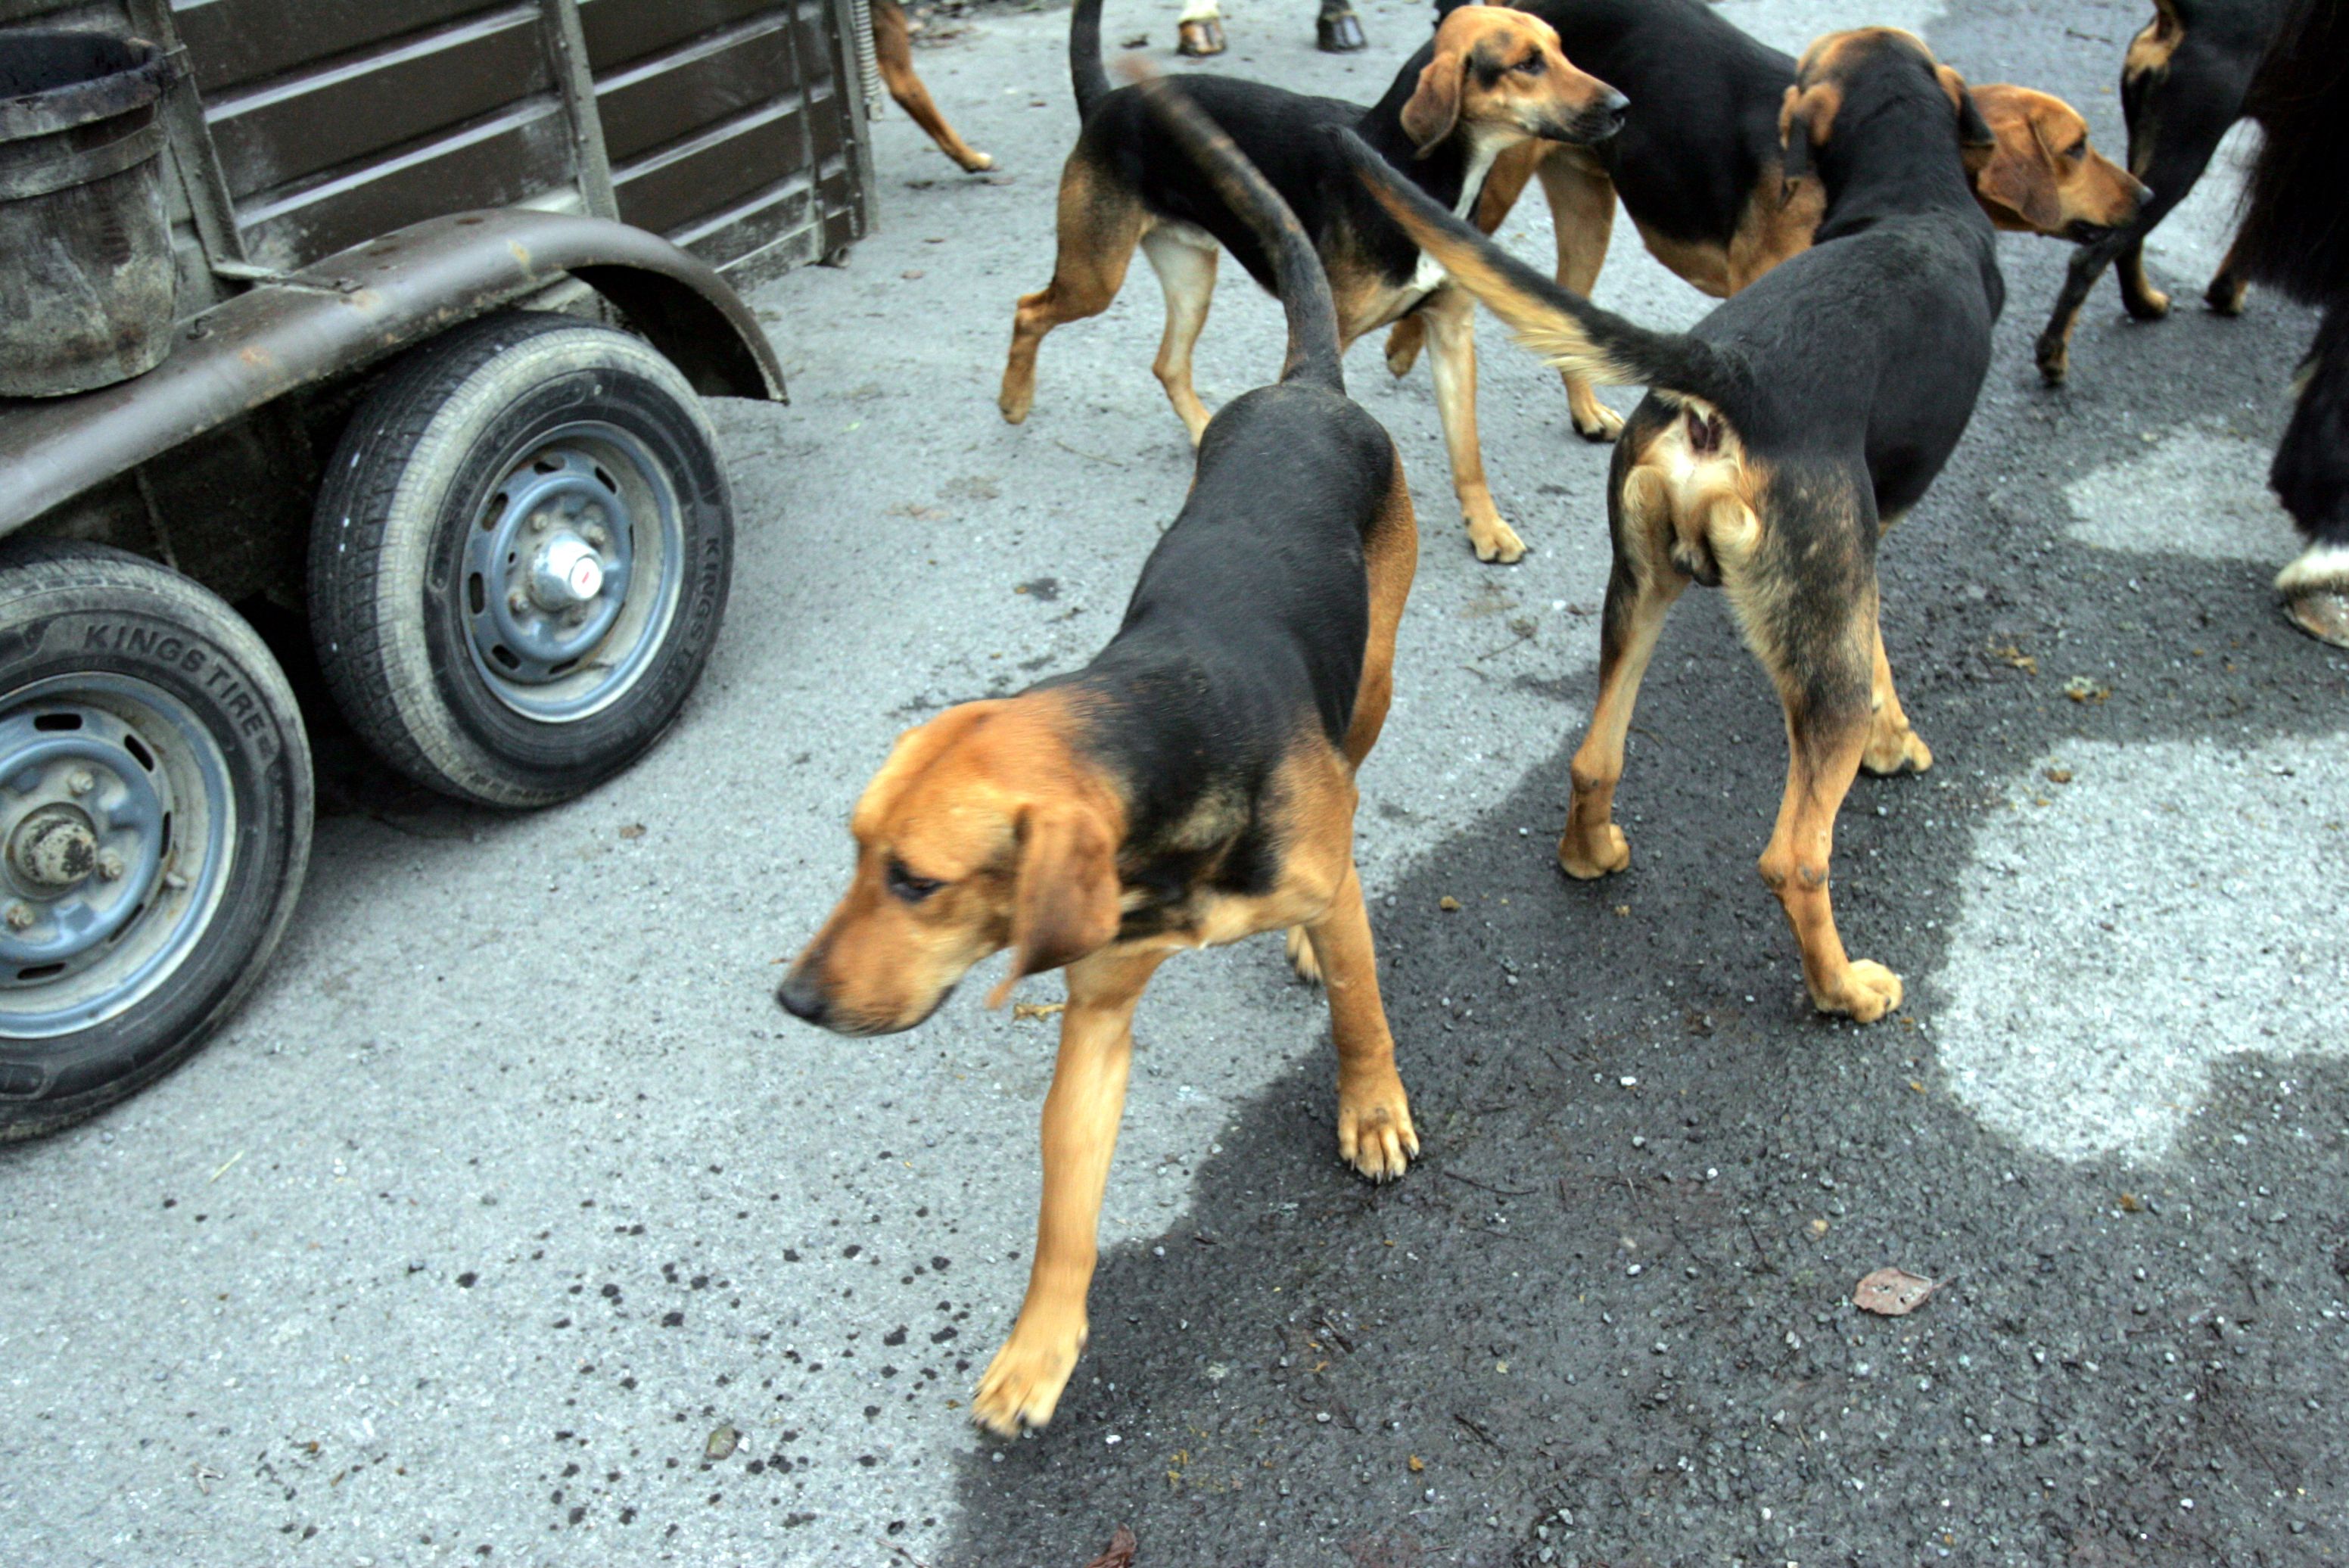 ON THE HUNT: Packs of hounds with members from the South Dublin Hunting Club get ready for a drag hunt in Clonee Co Meath back in 2006